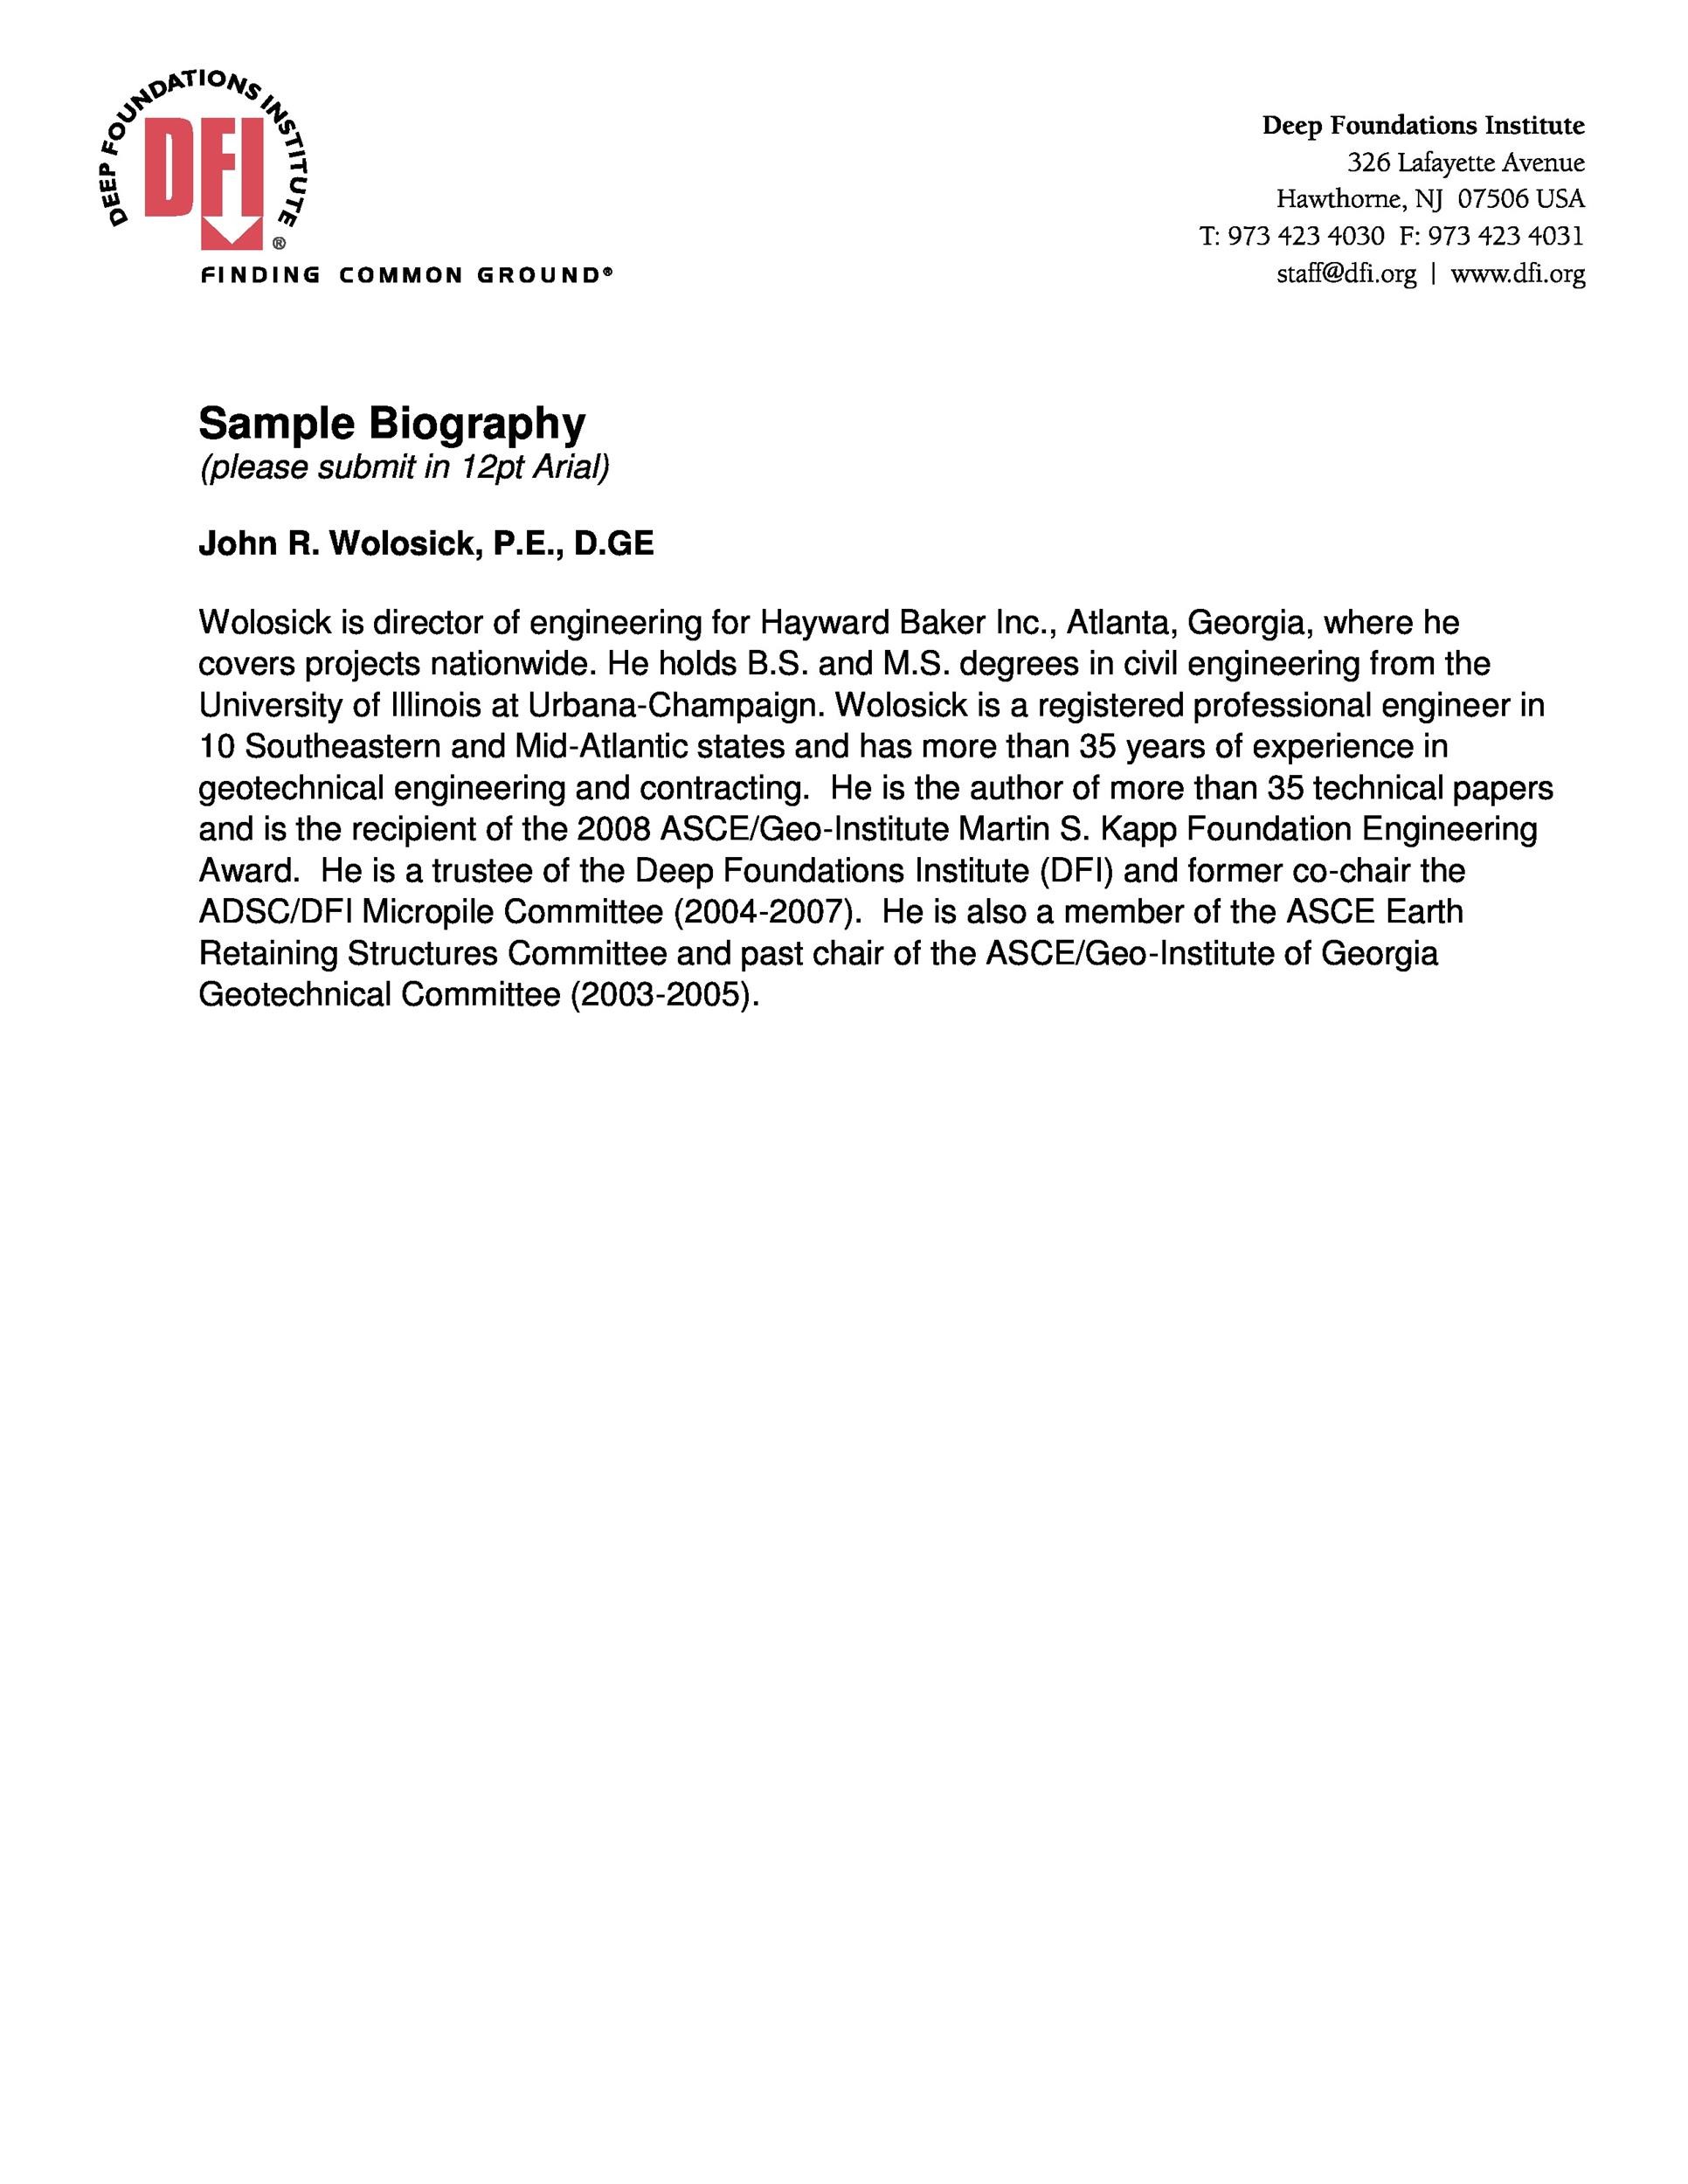 How to Write a Biography Resume